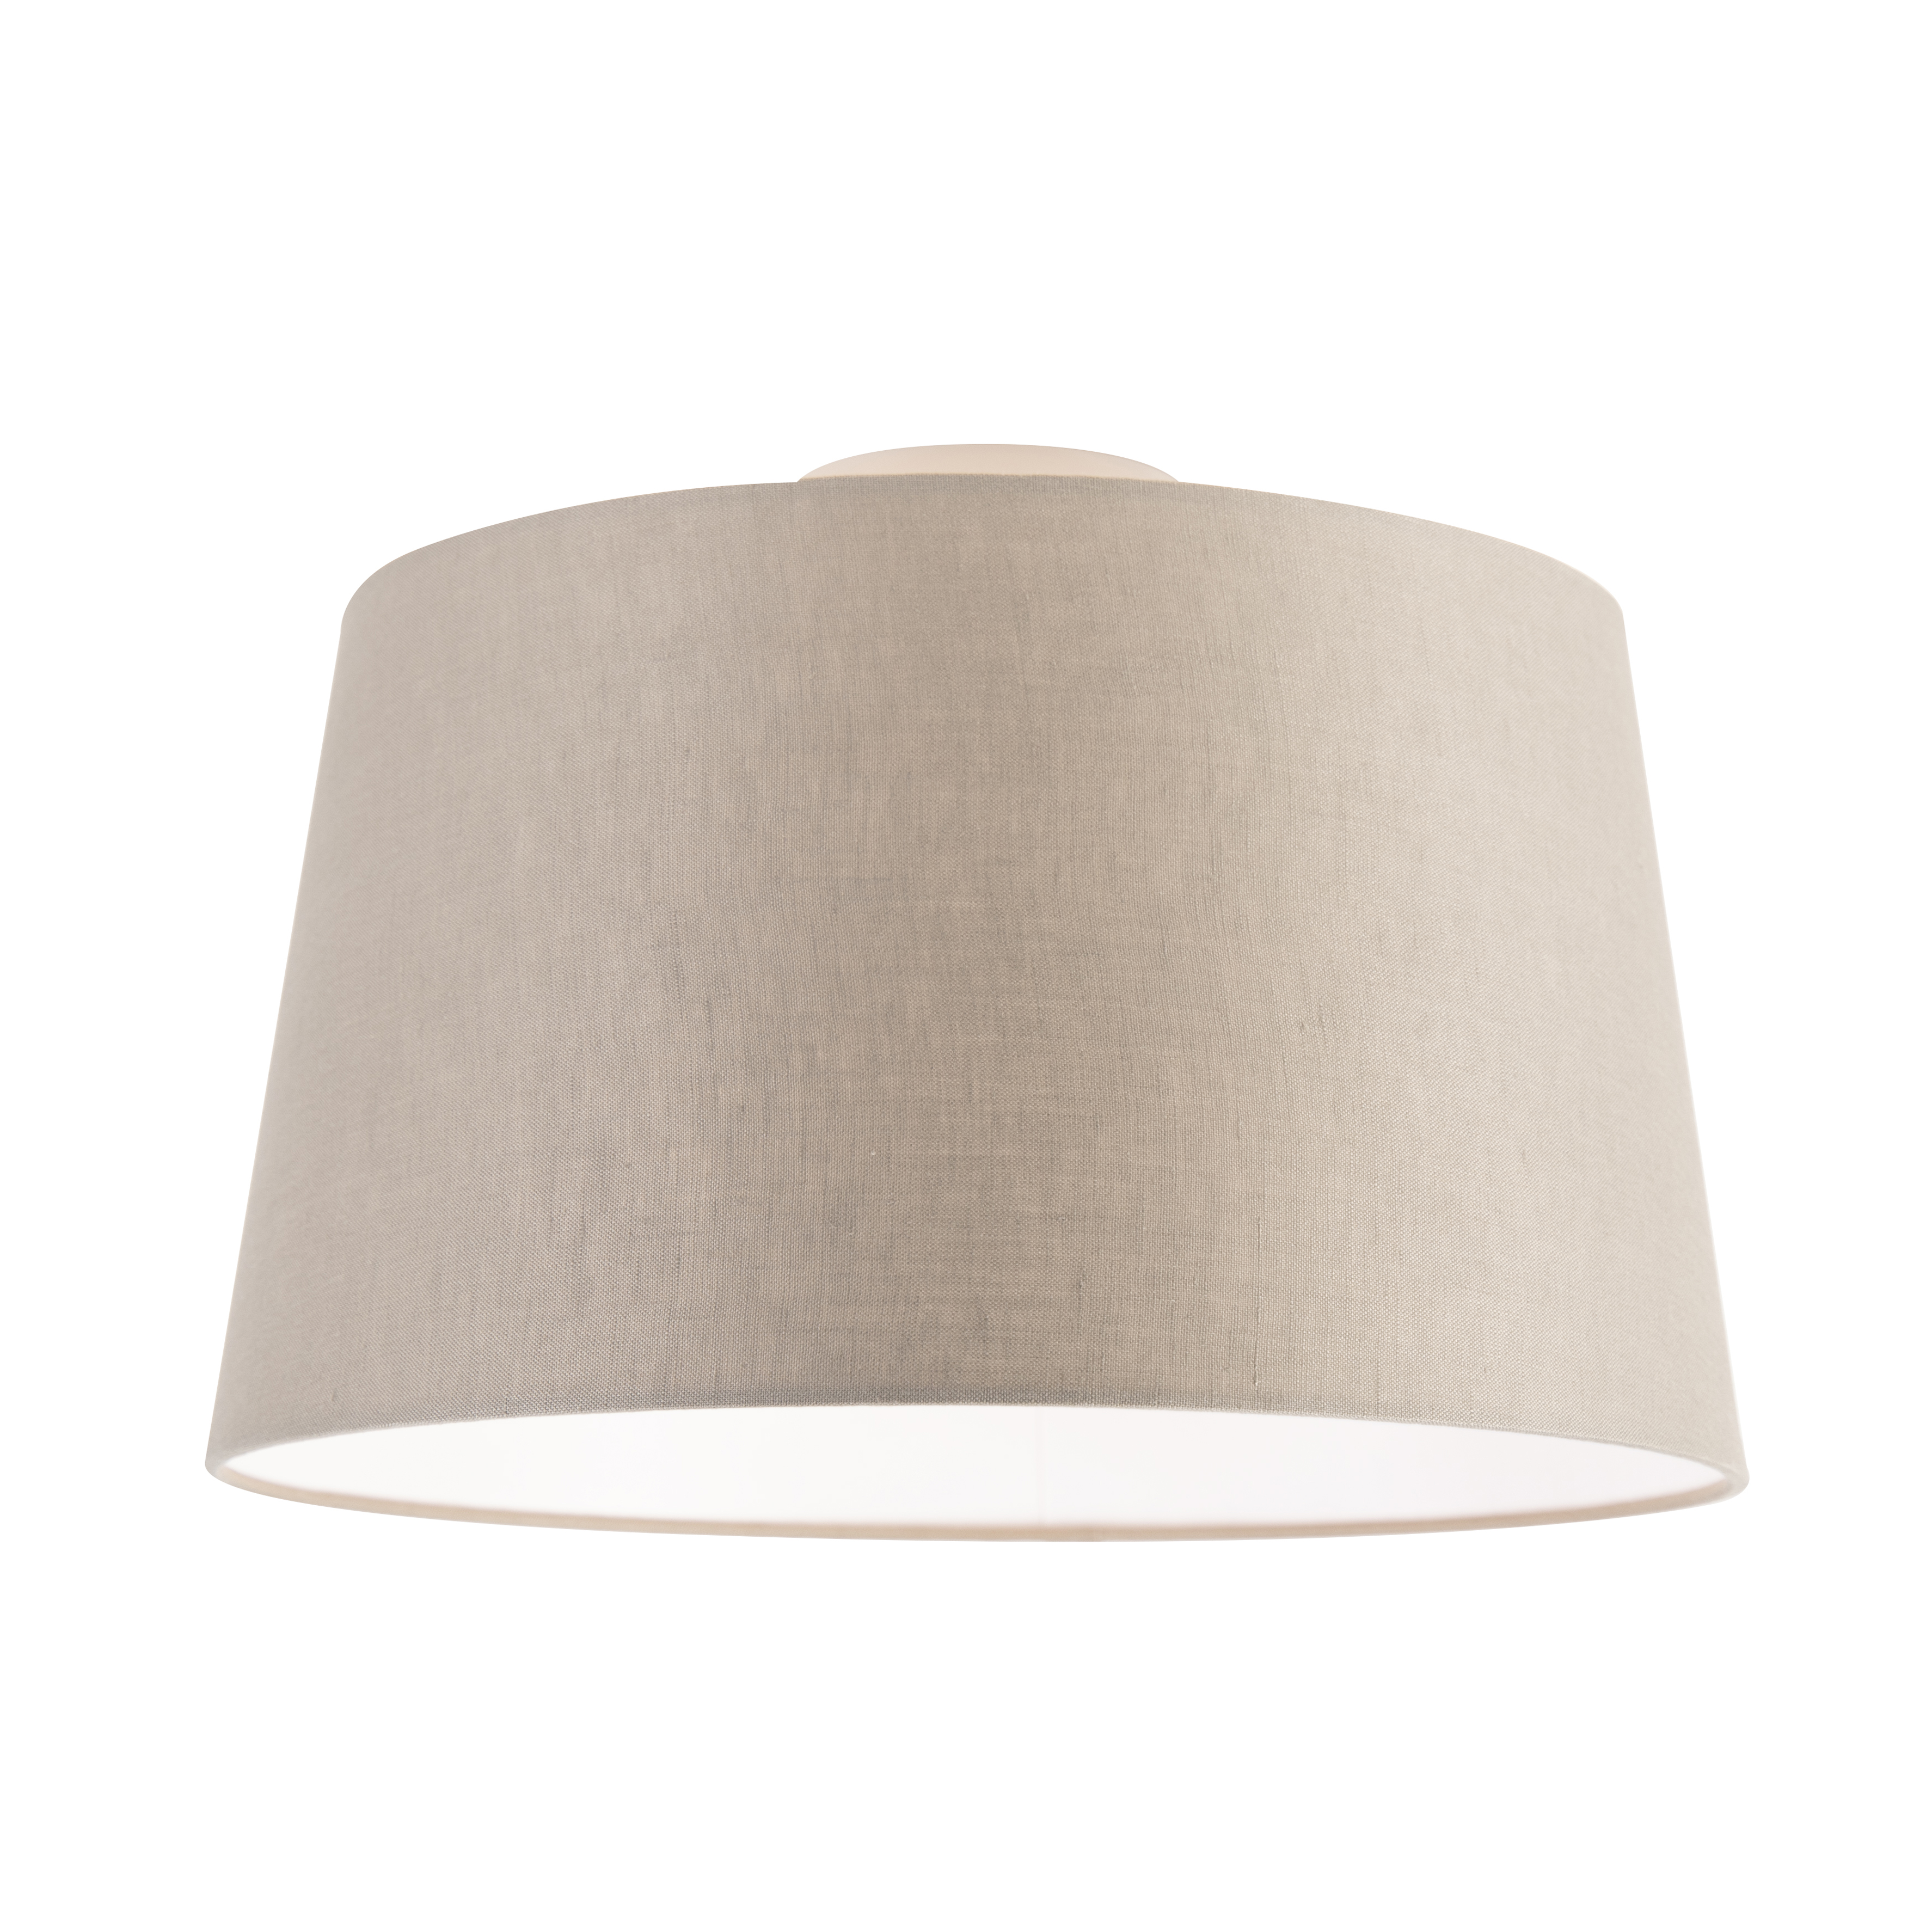 Modern ceiling lamp with taupe shade 35 cm - Combi